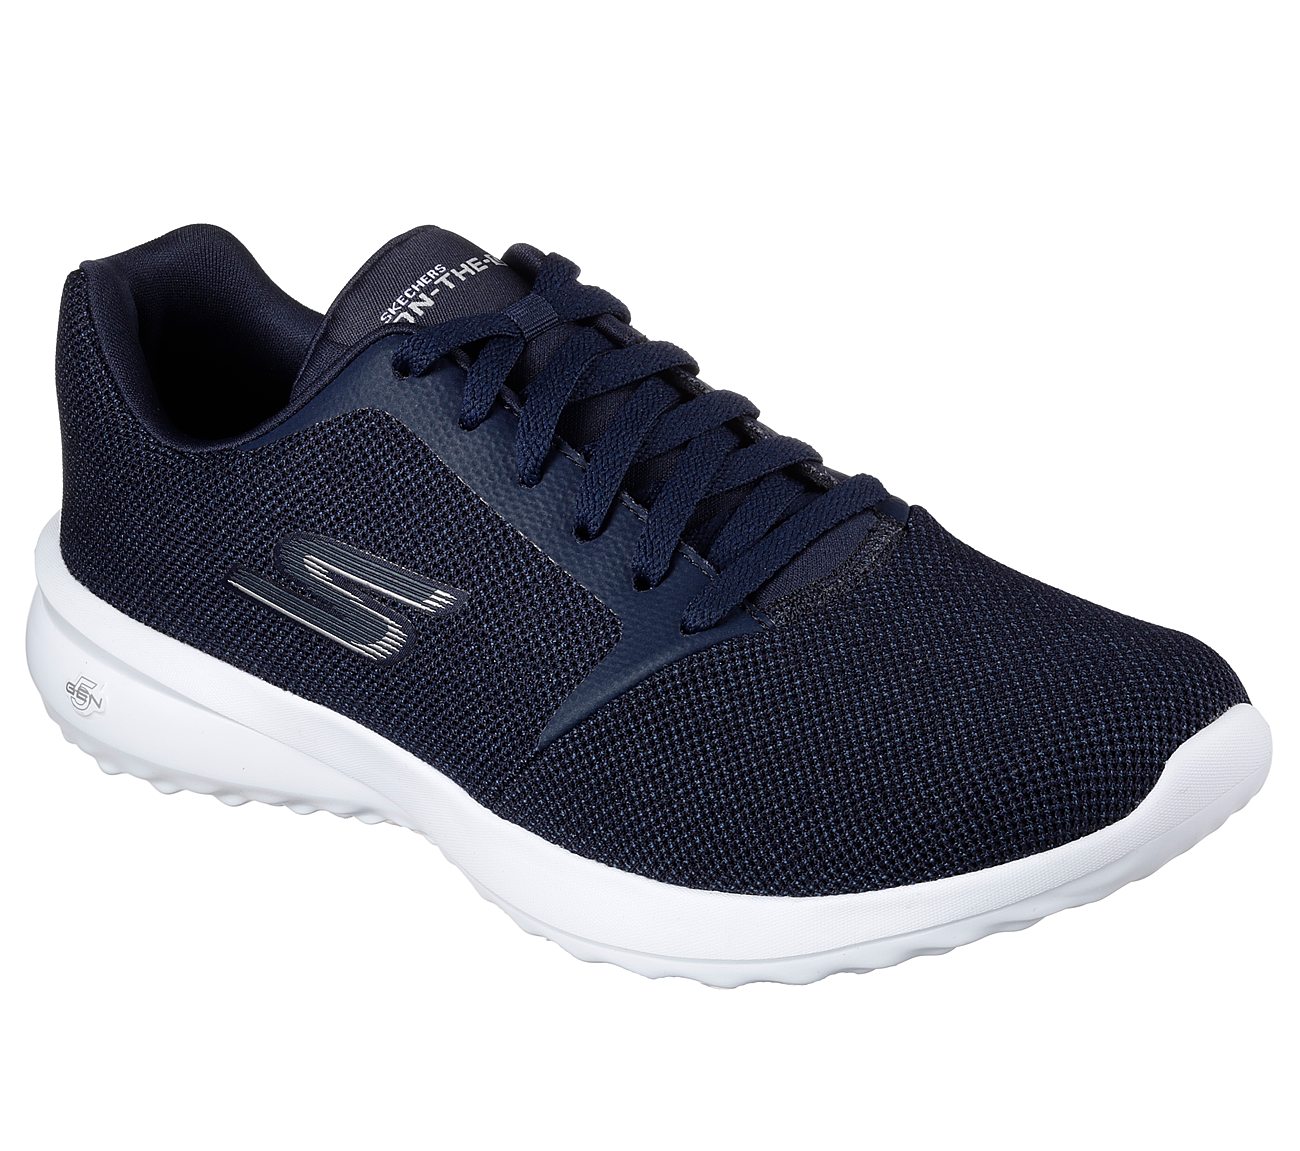 City 3.0 Skechers Performance Shoes